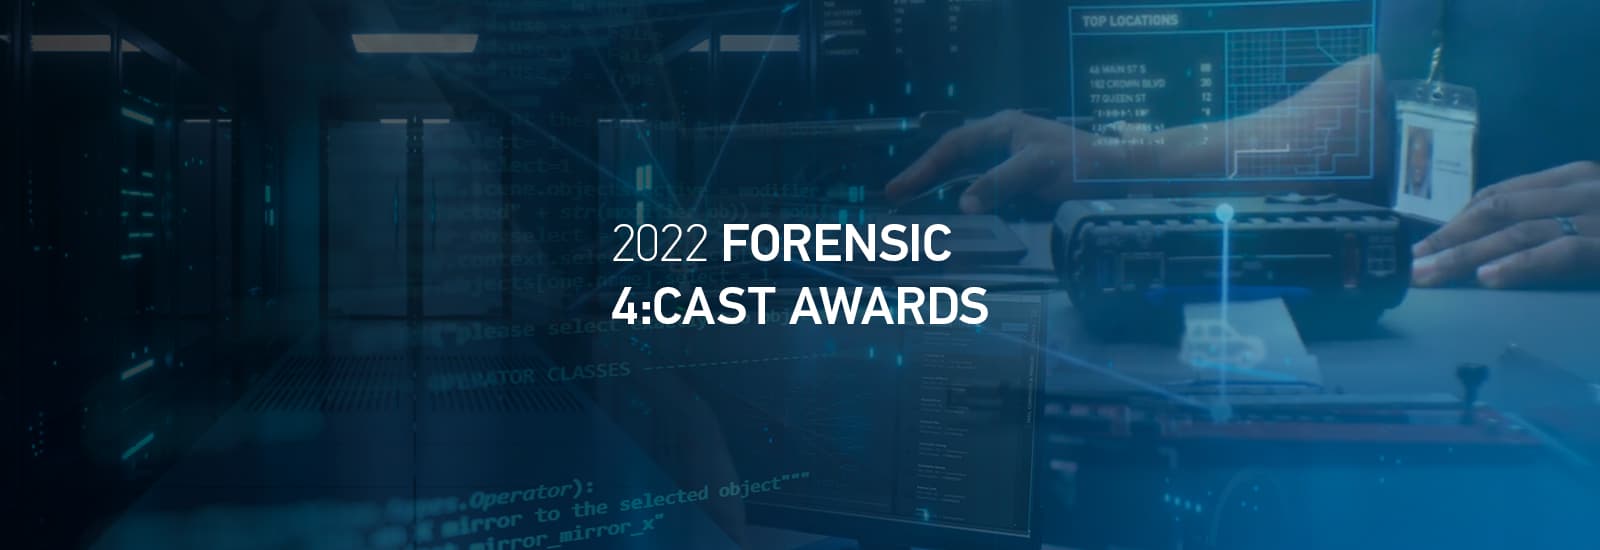 Forensic 4:cast 2022